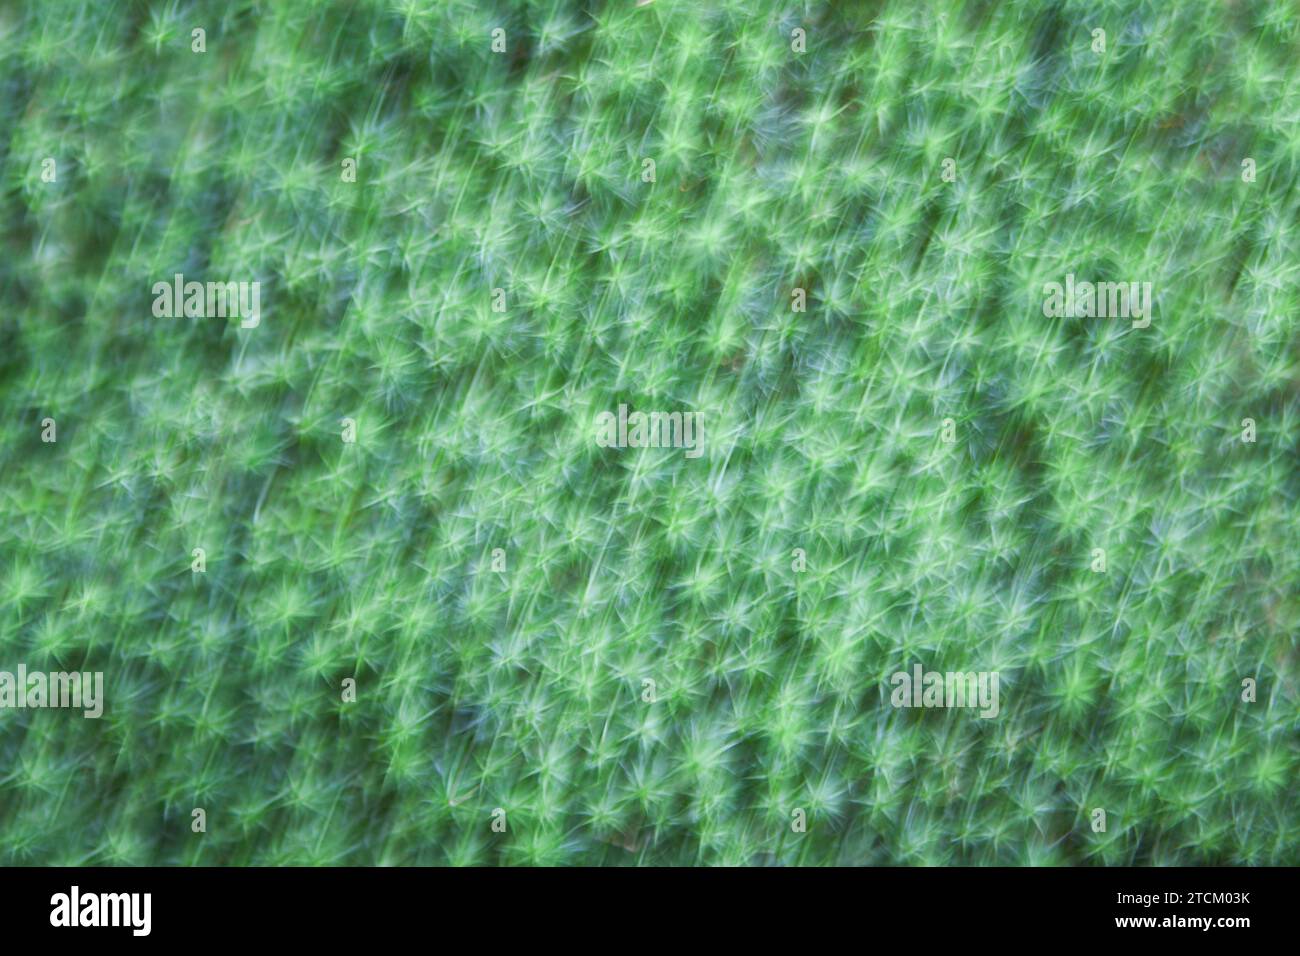 Moss structures, abstract background, wiping effect, bulb exposure Stock Photo